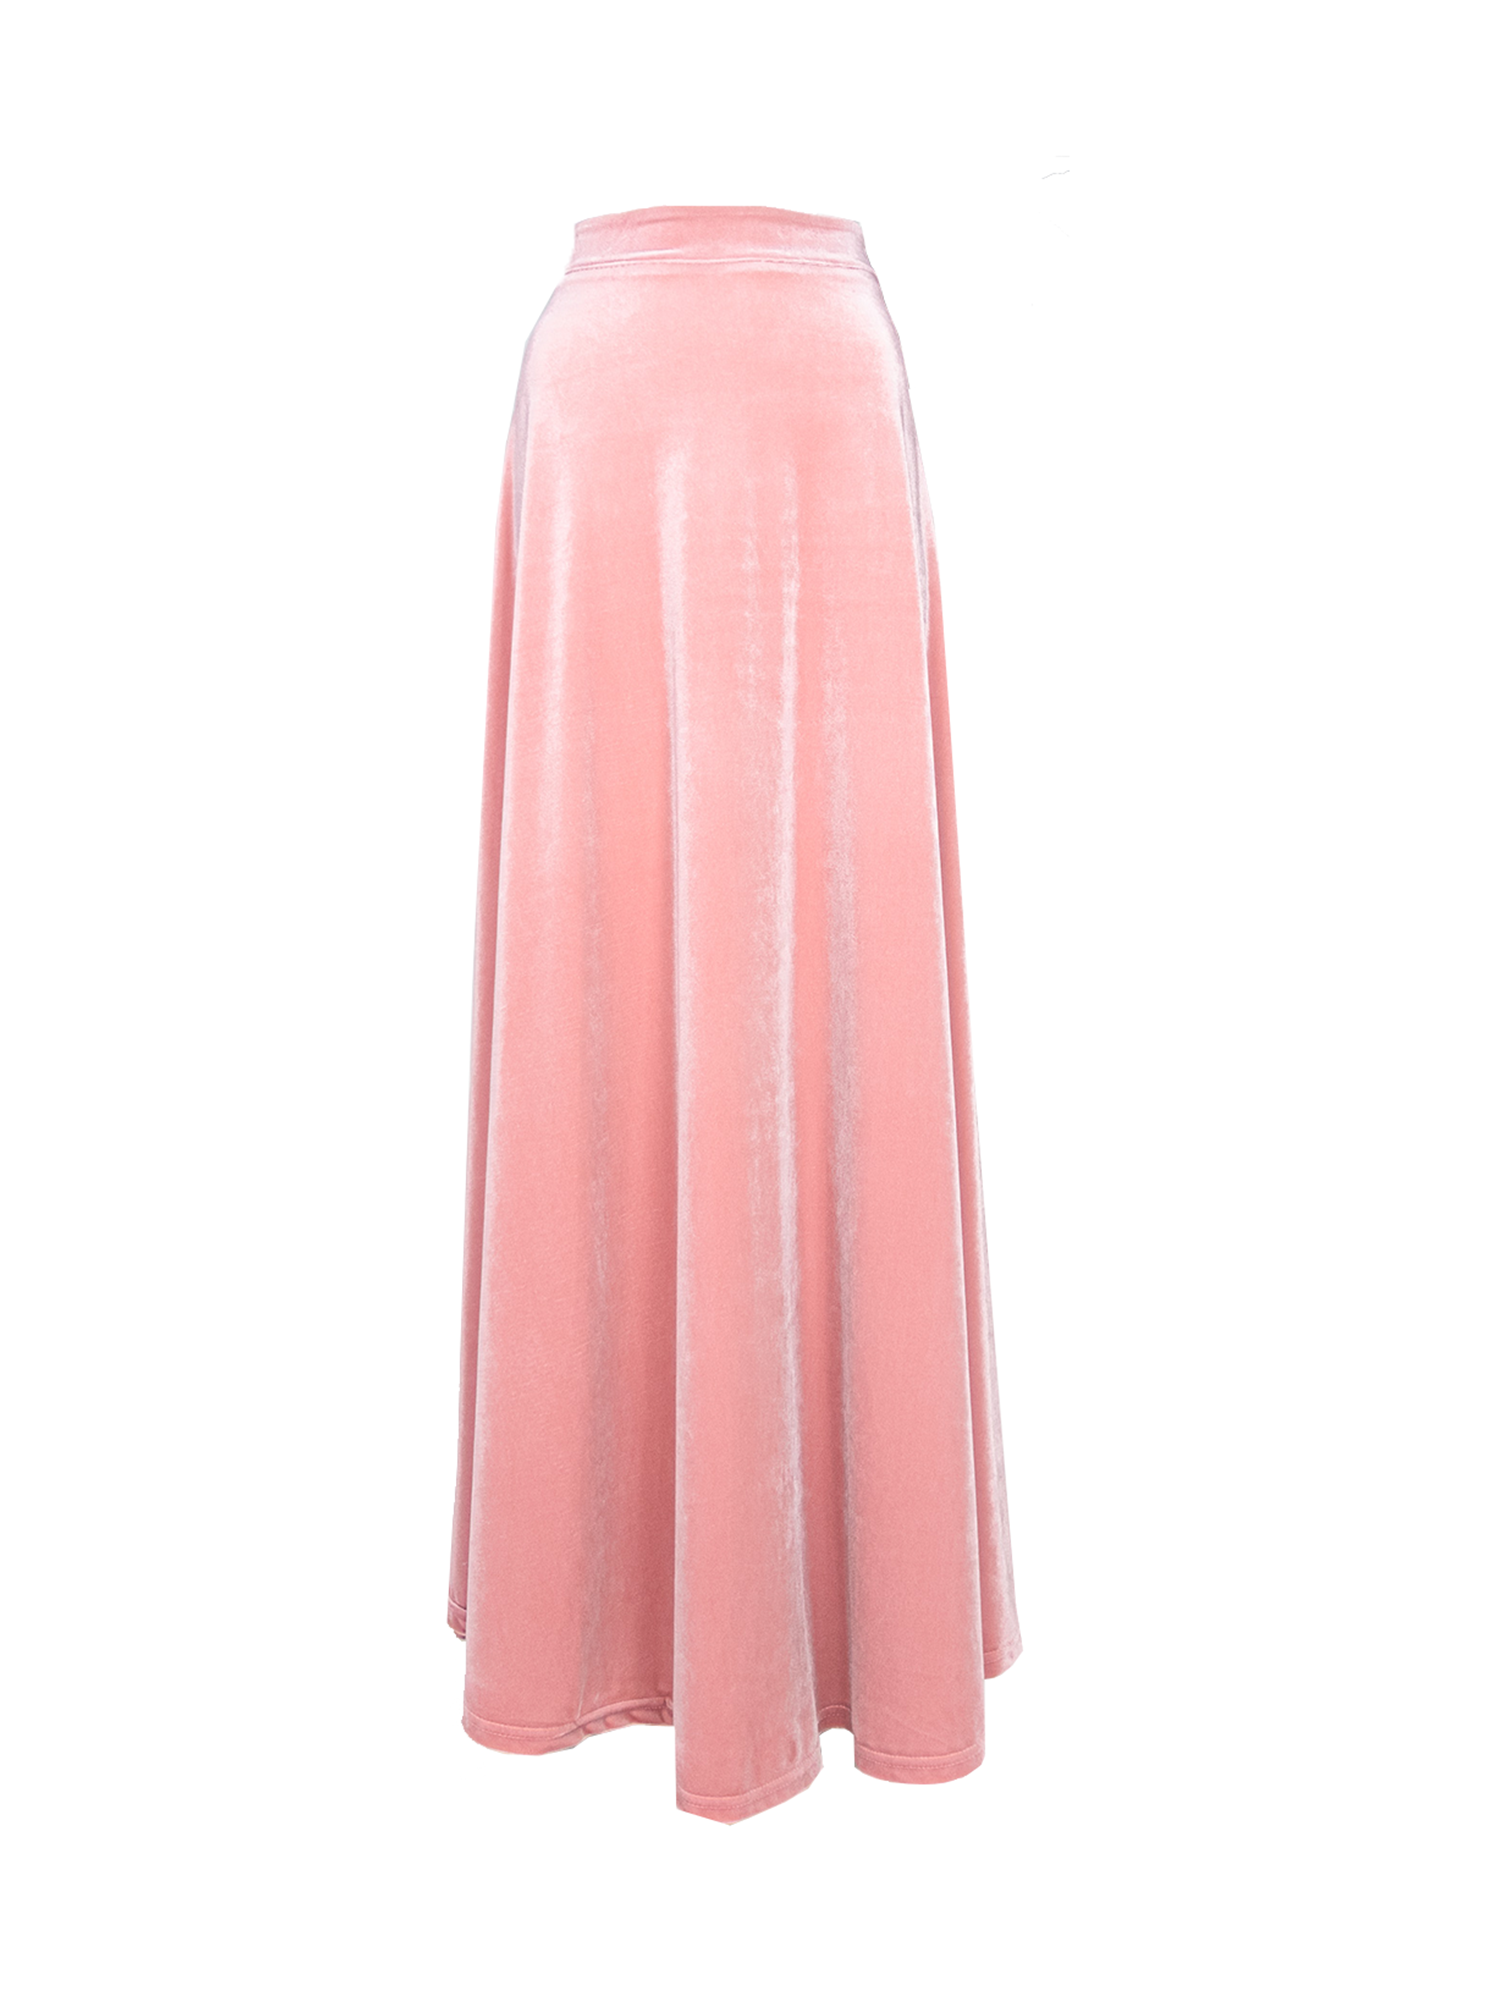 TOSCA - long chenille pink maxi skirt